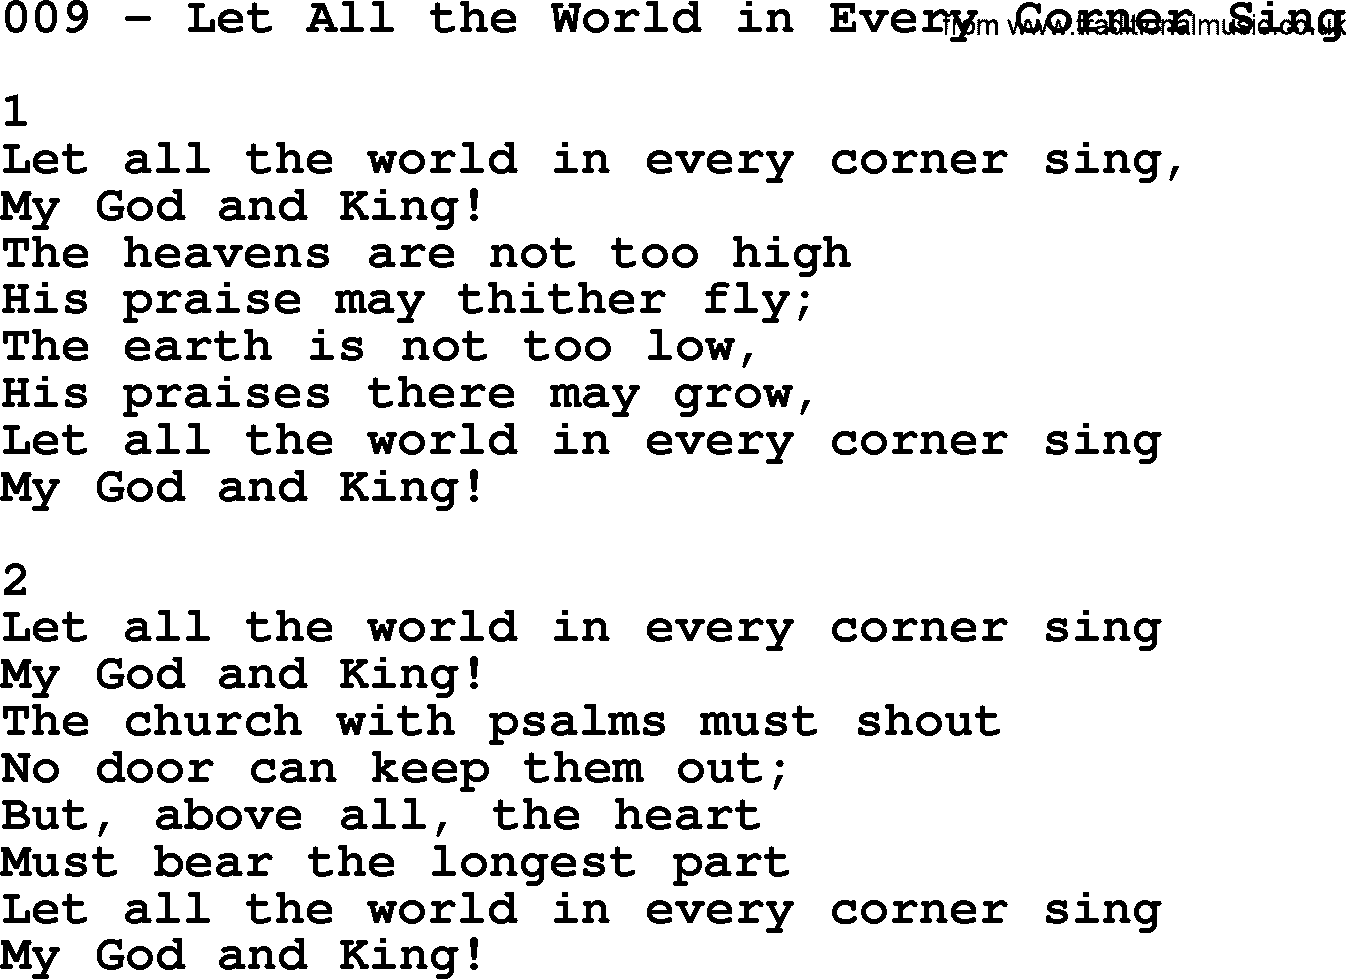 Complete Adventis Hymnal, title: 009-Let All The World In Every Corner Sing, with lyrics, midi, mp3, powerpoints(PPT) and PDF,